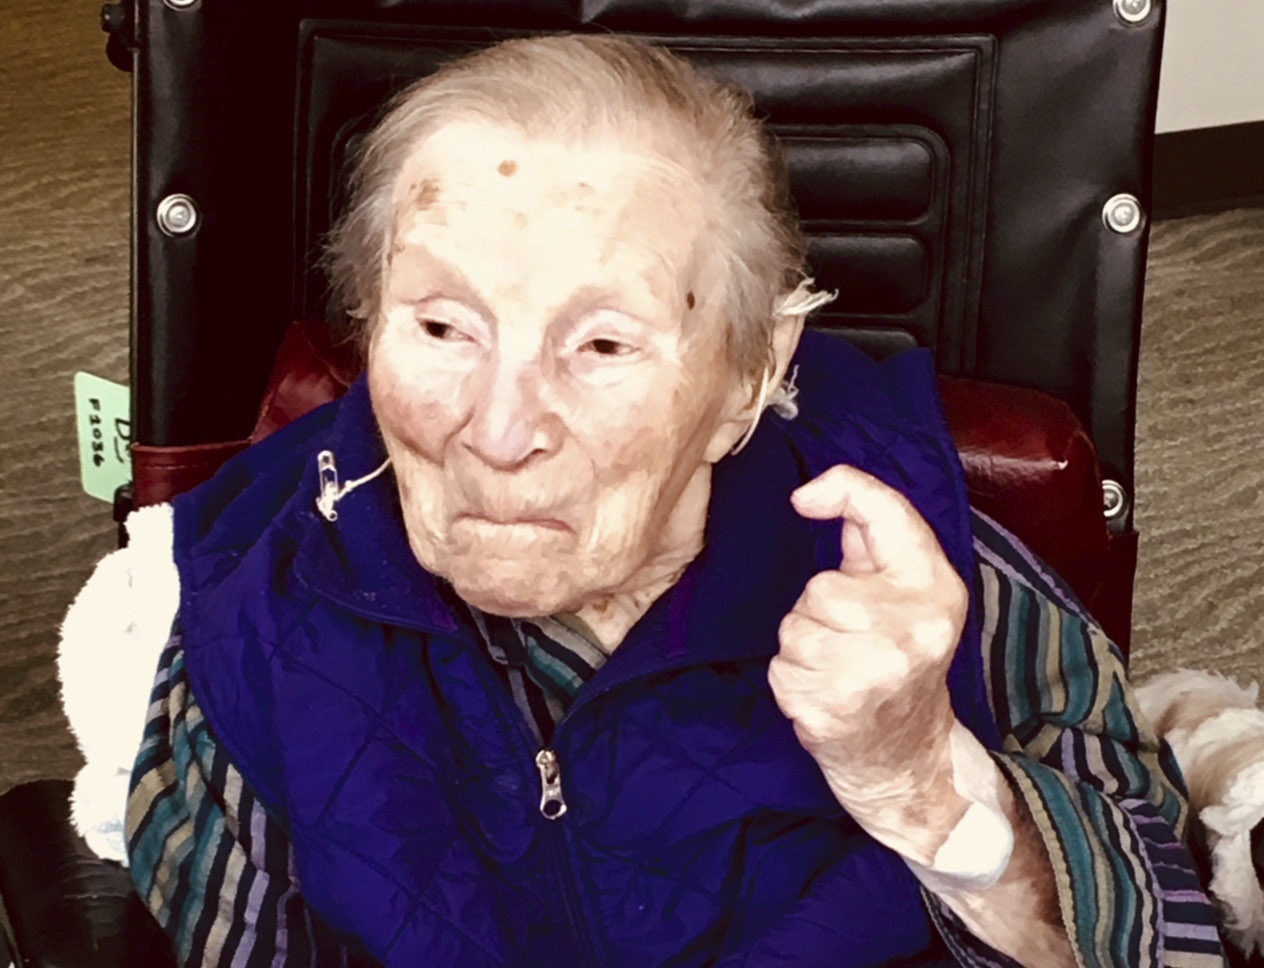 Shortly before her 110th birthday. (Source: The Jewish News of Northern California)